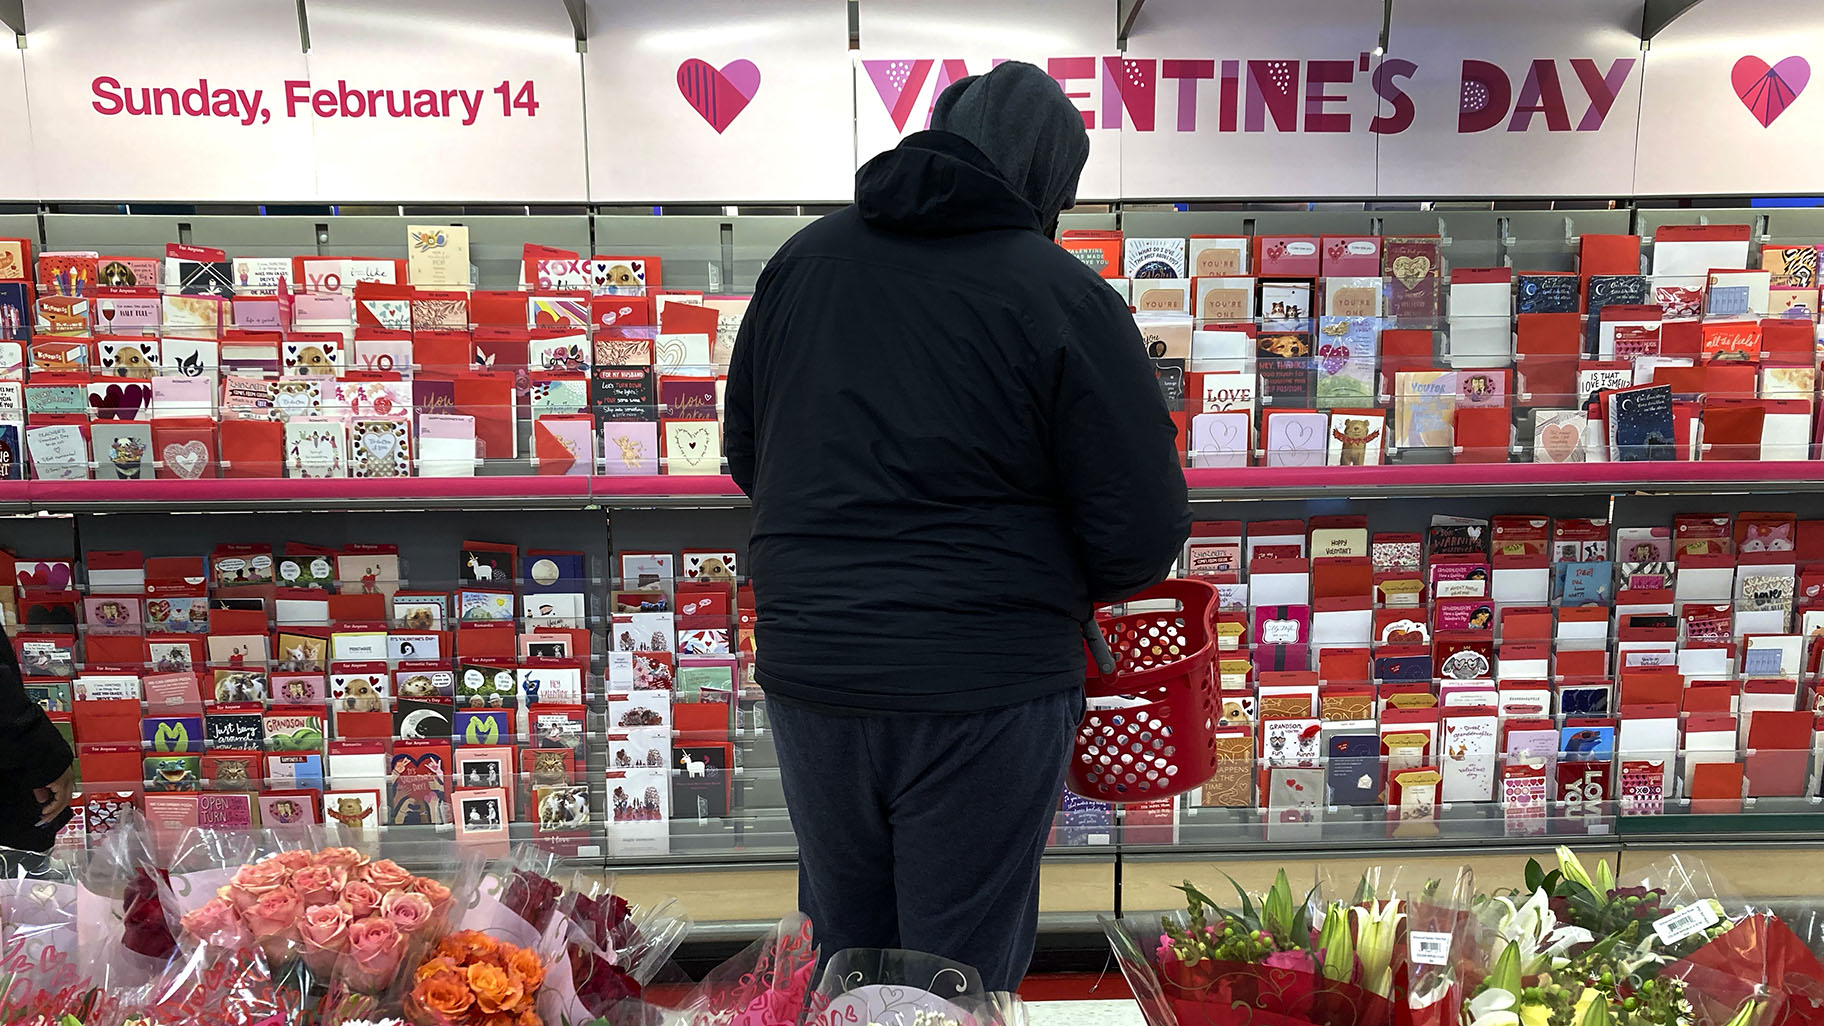 A Bleak Valentine's Day, Lovers Find Hope In Roses, Vaccines